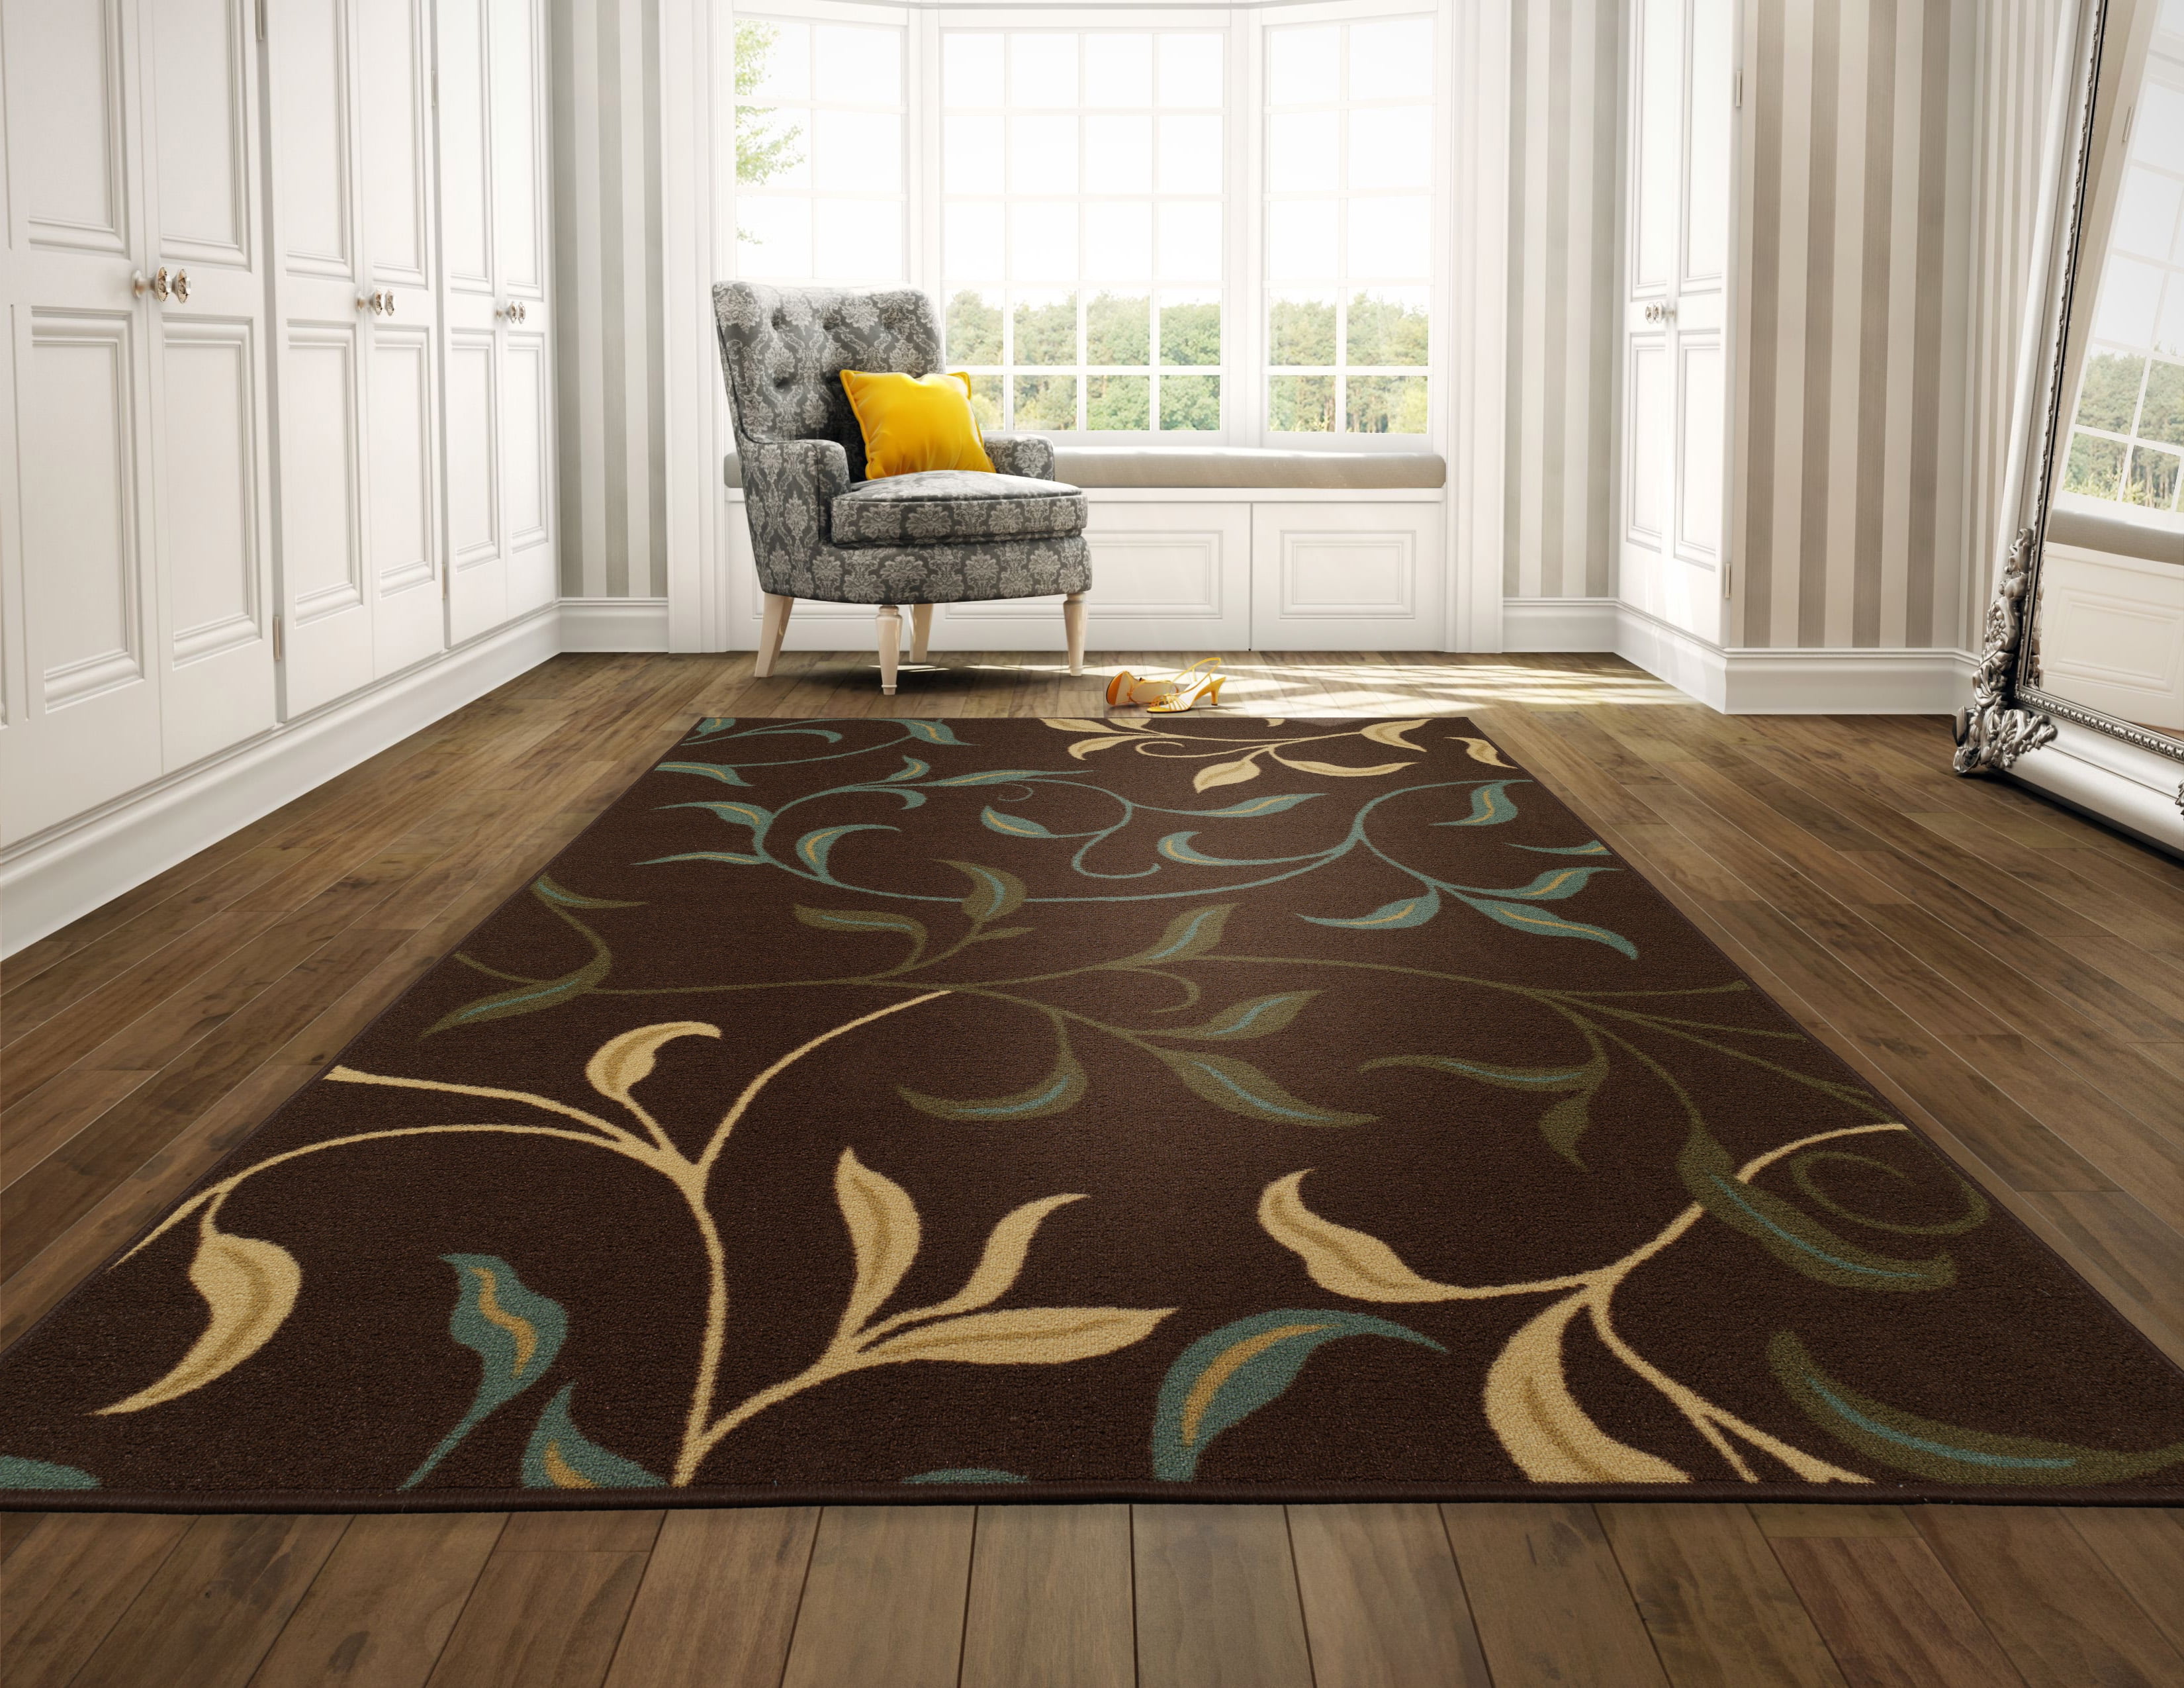 x 7 ft Oval Area Rugs Brown 5 ft Seafoam Leaves Spot Clean Non-Skid Rubber Mat 